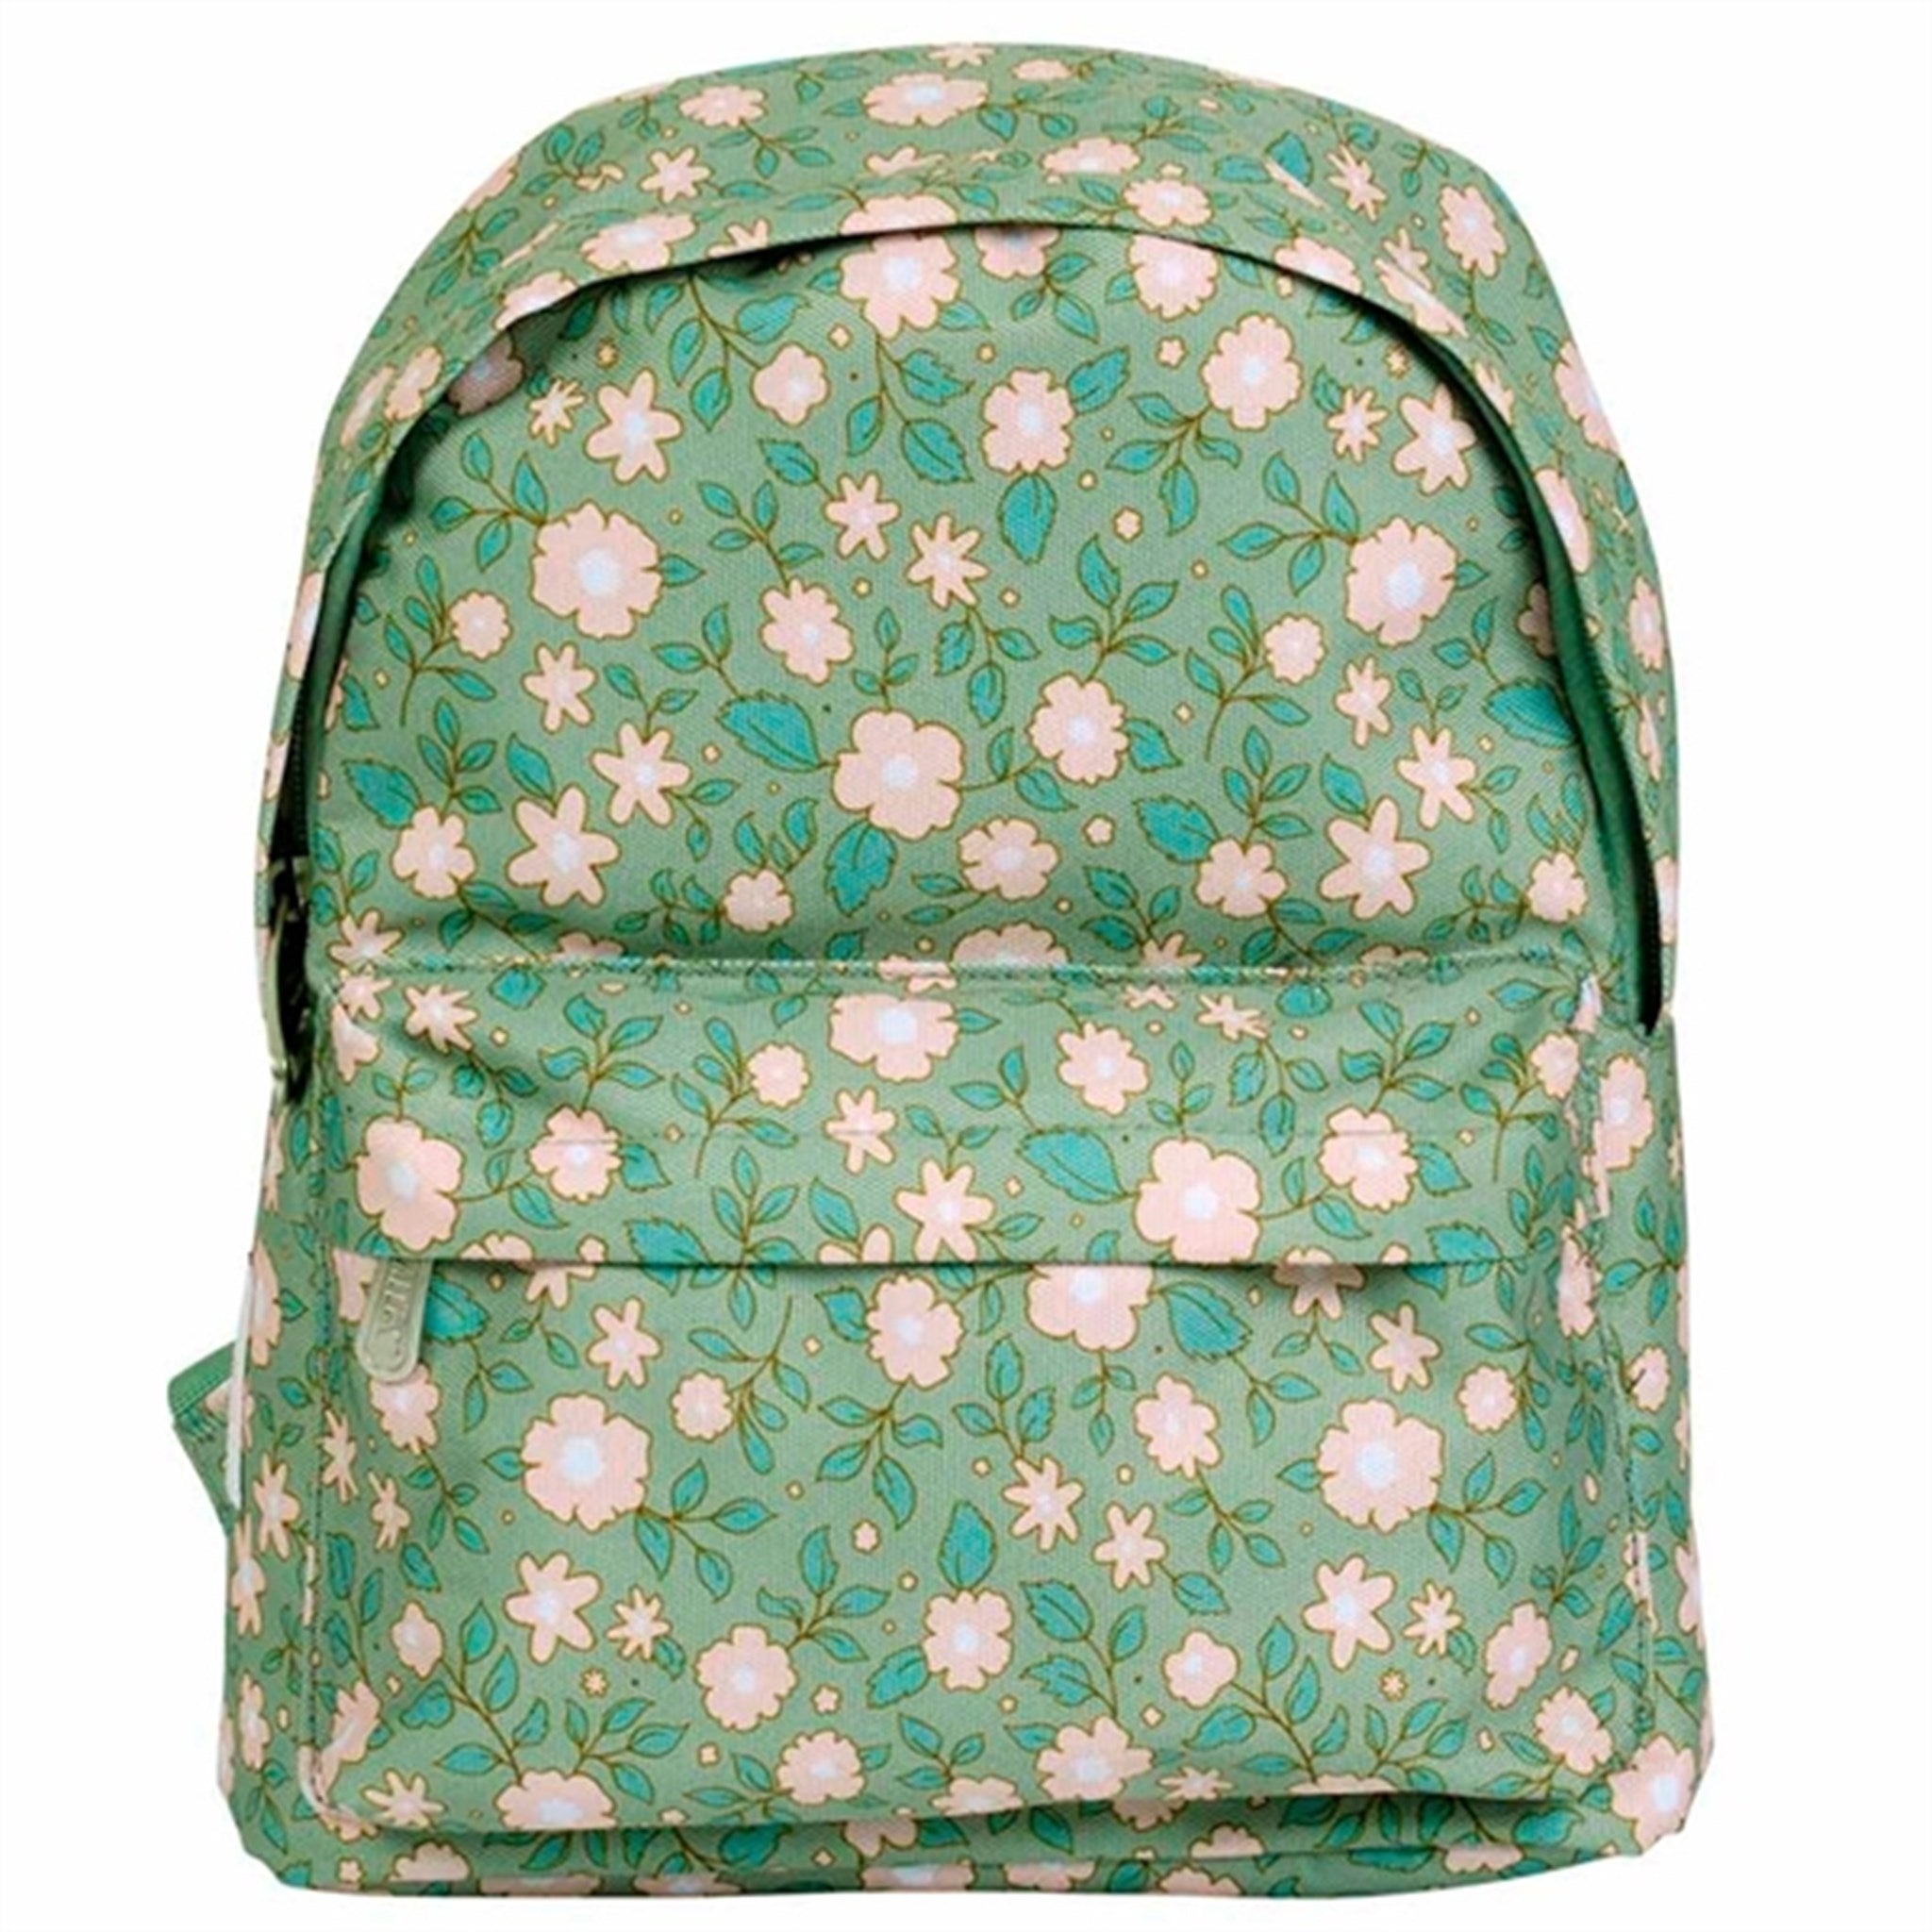 A Little Lovely Company Backpack Small Blossom Sage